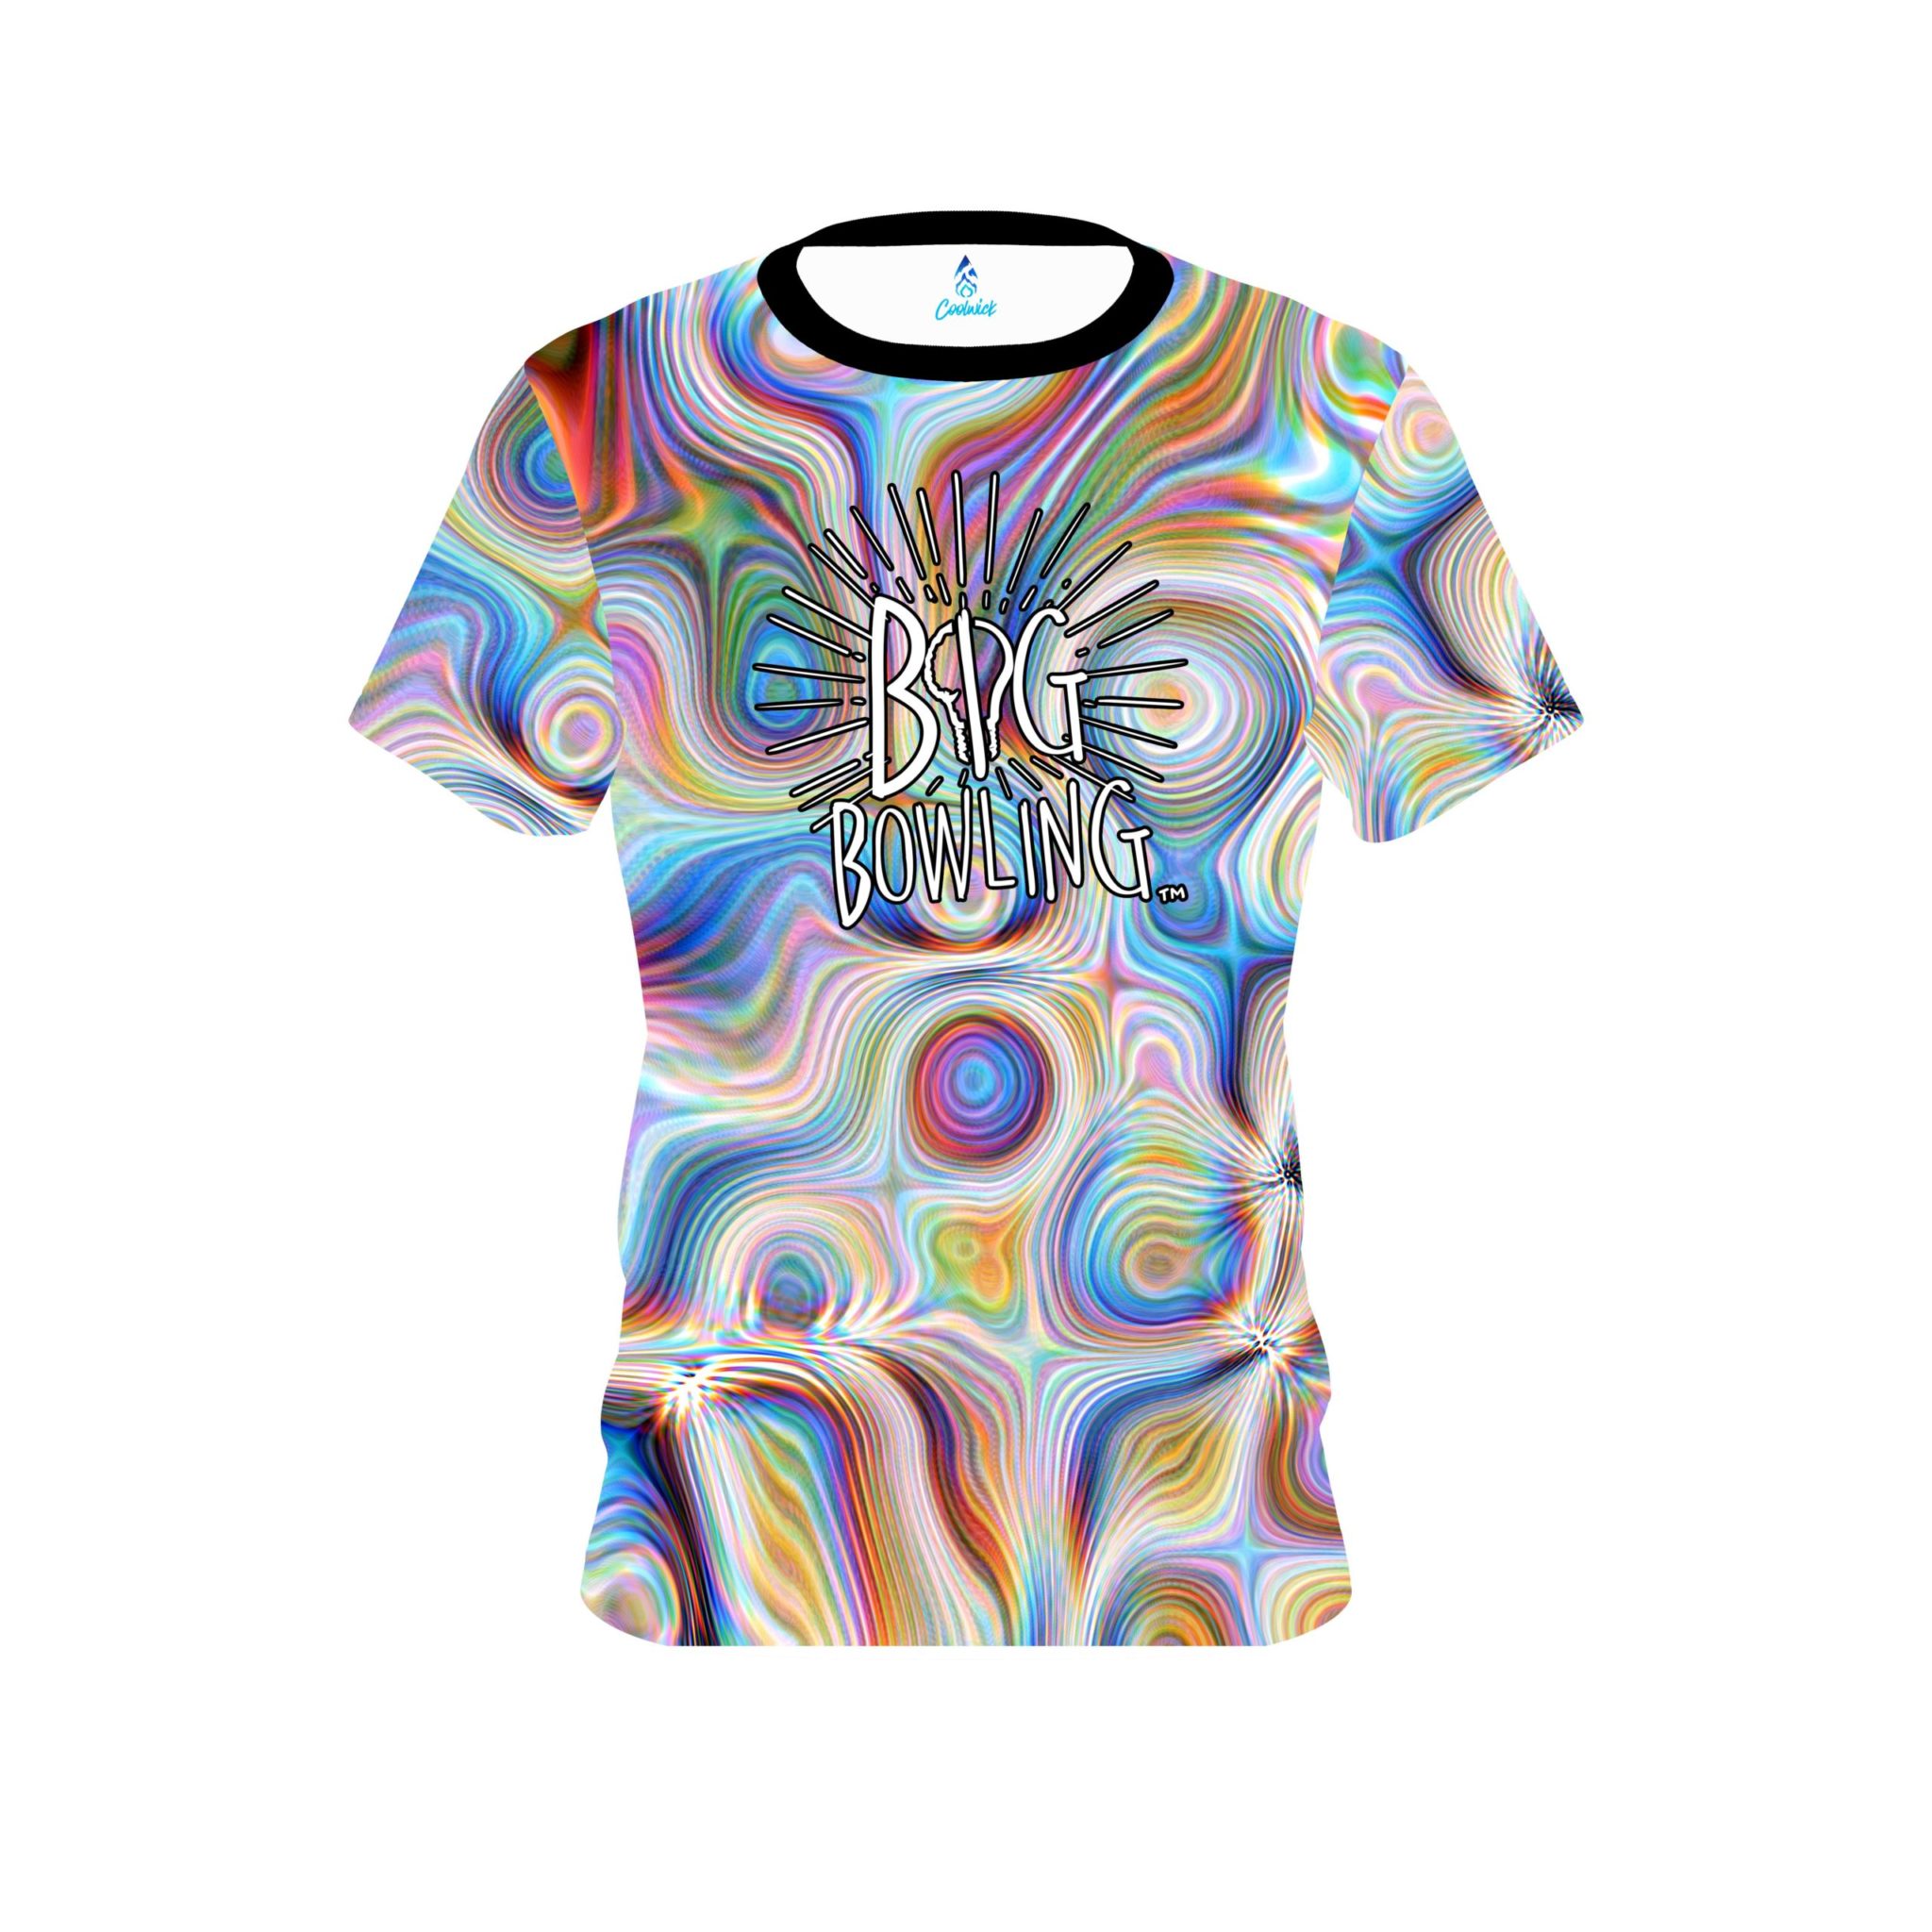 Big Bowling Rainbow Hallucinate CoolWick Bowling Jersey